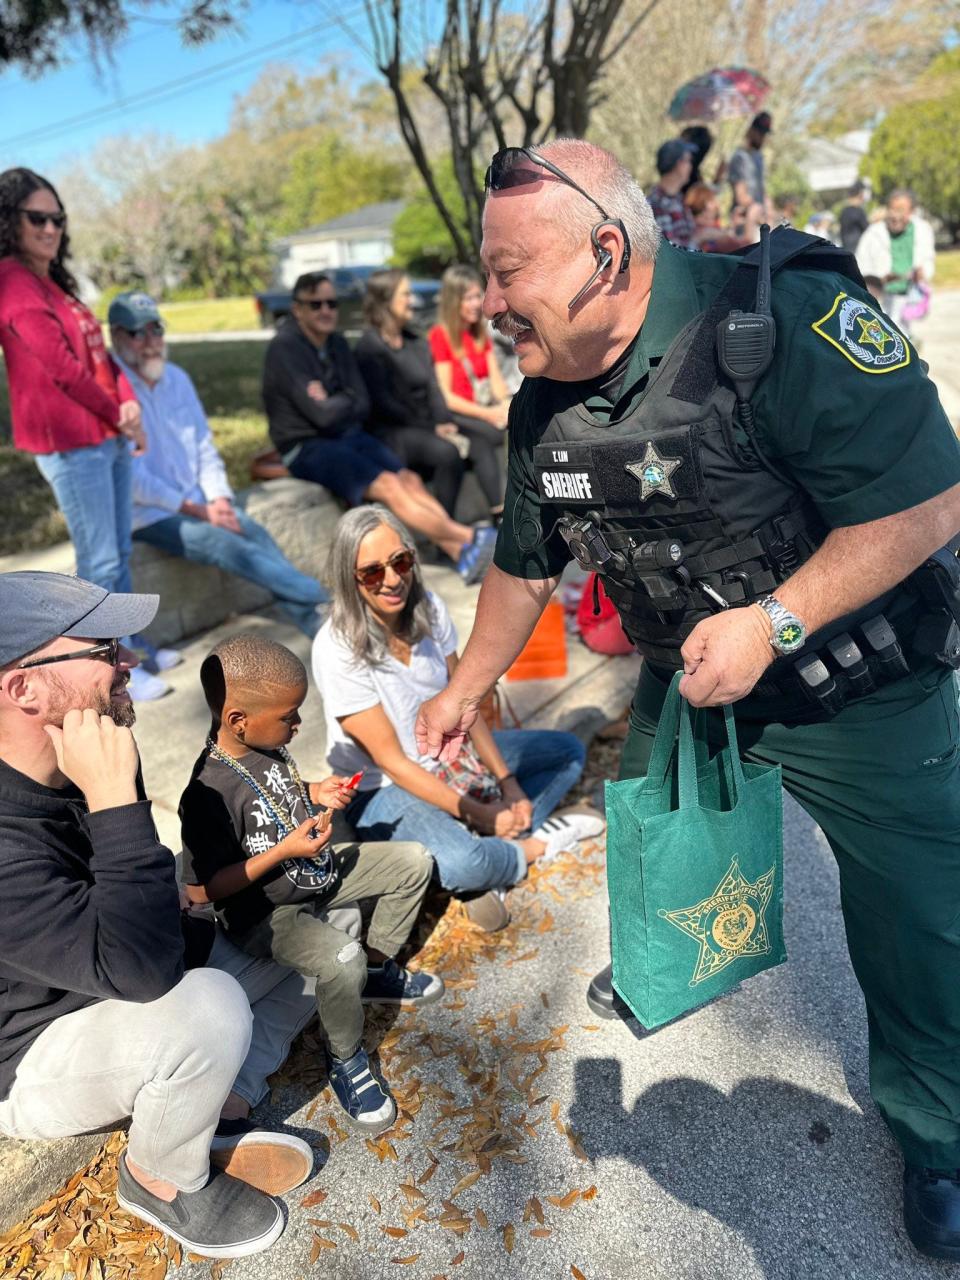 Orange County deputies attended the 12th Annual Central Florida Dragon Parade in Orlando.